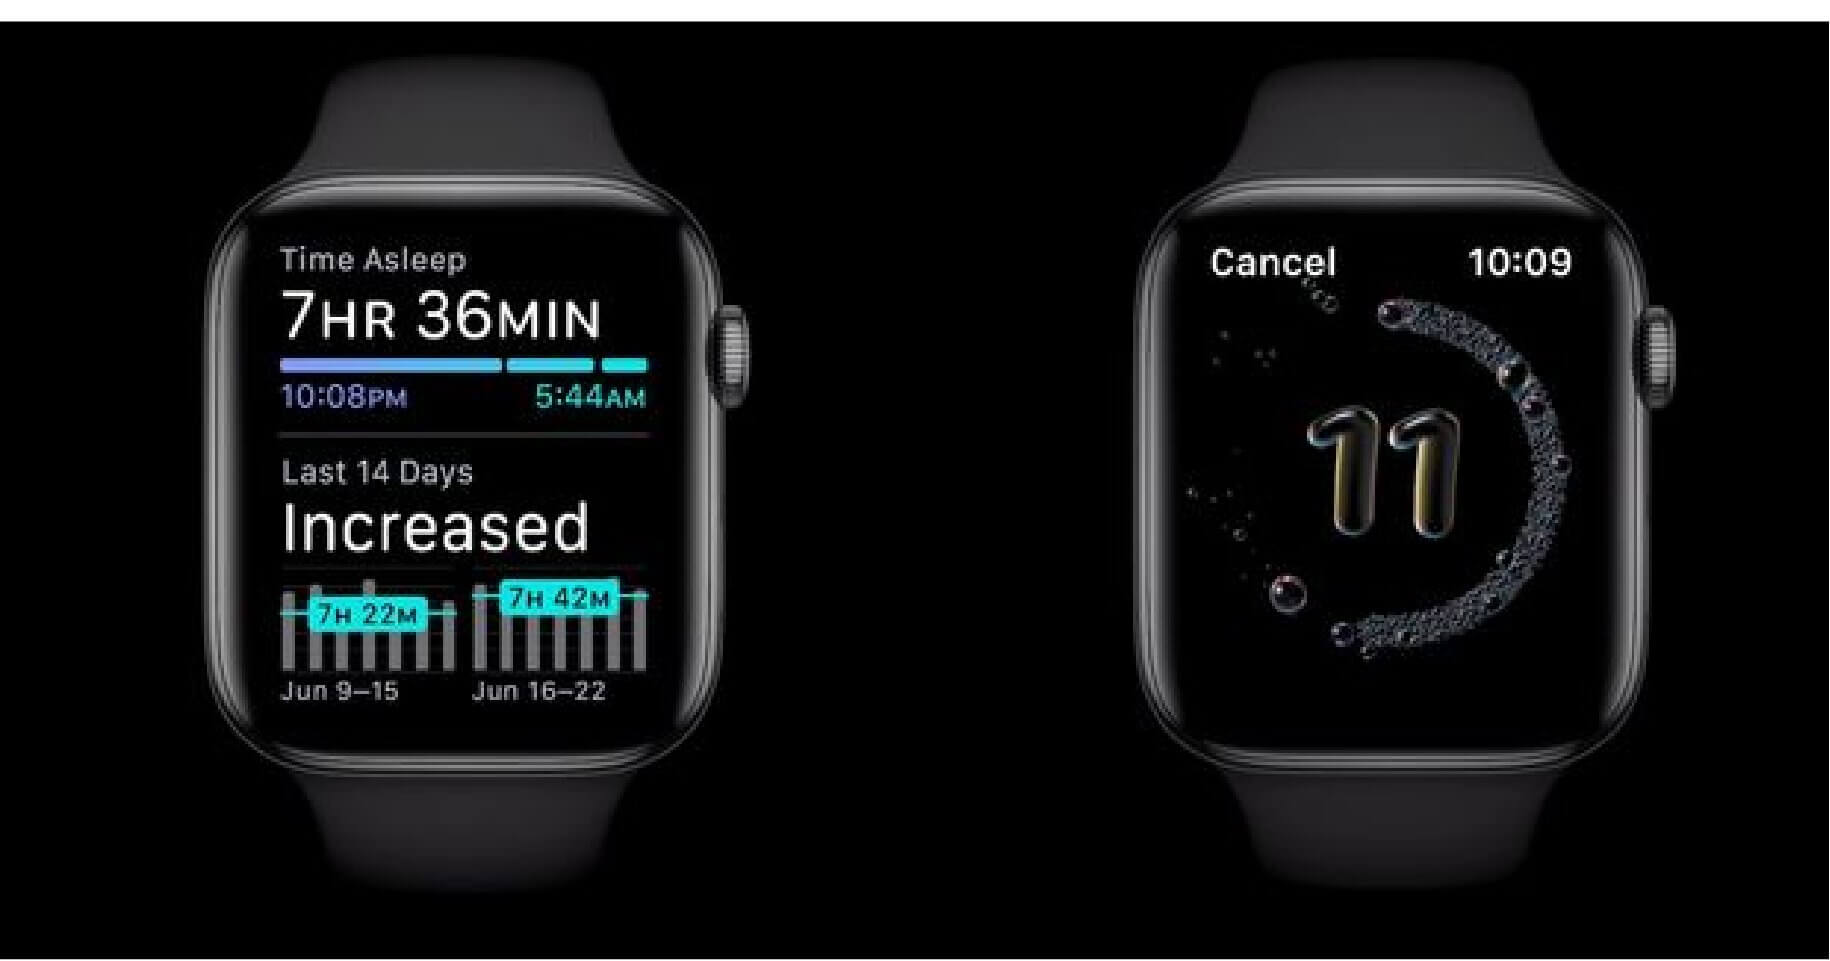 How to use the handwashing monitor feature in watchOS 7